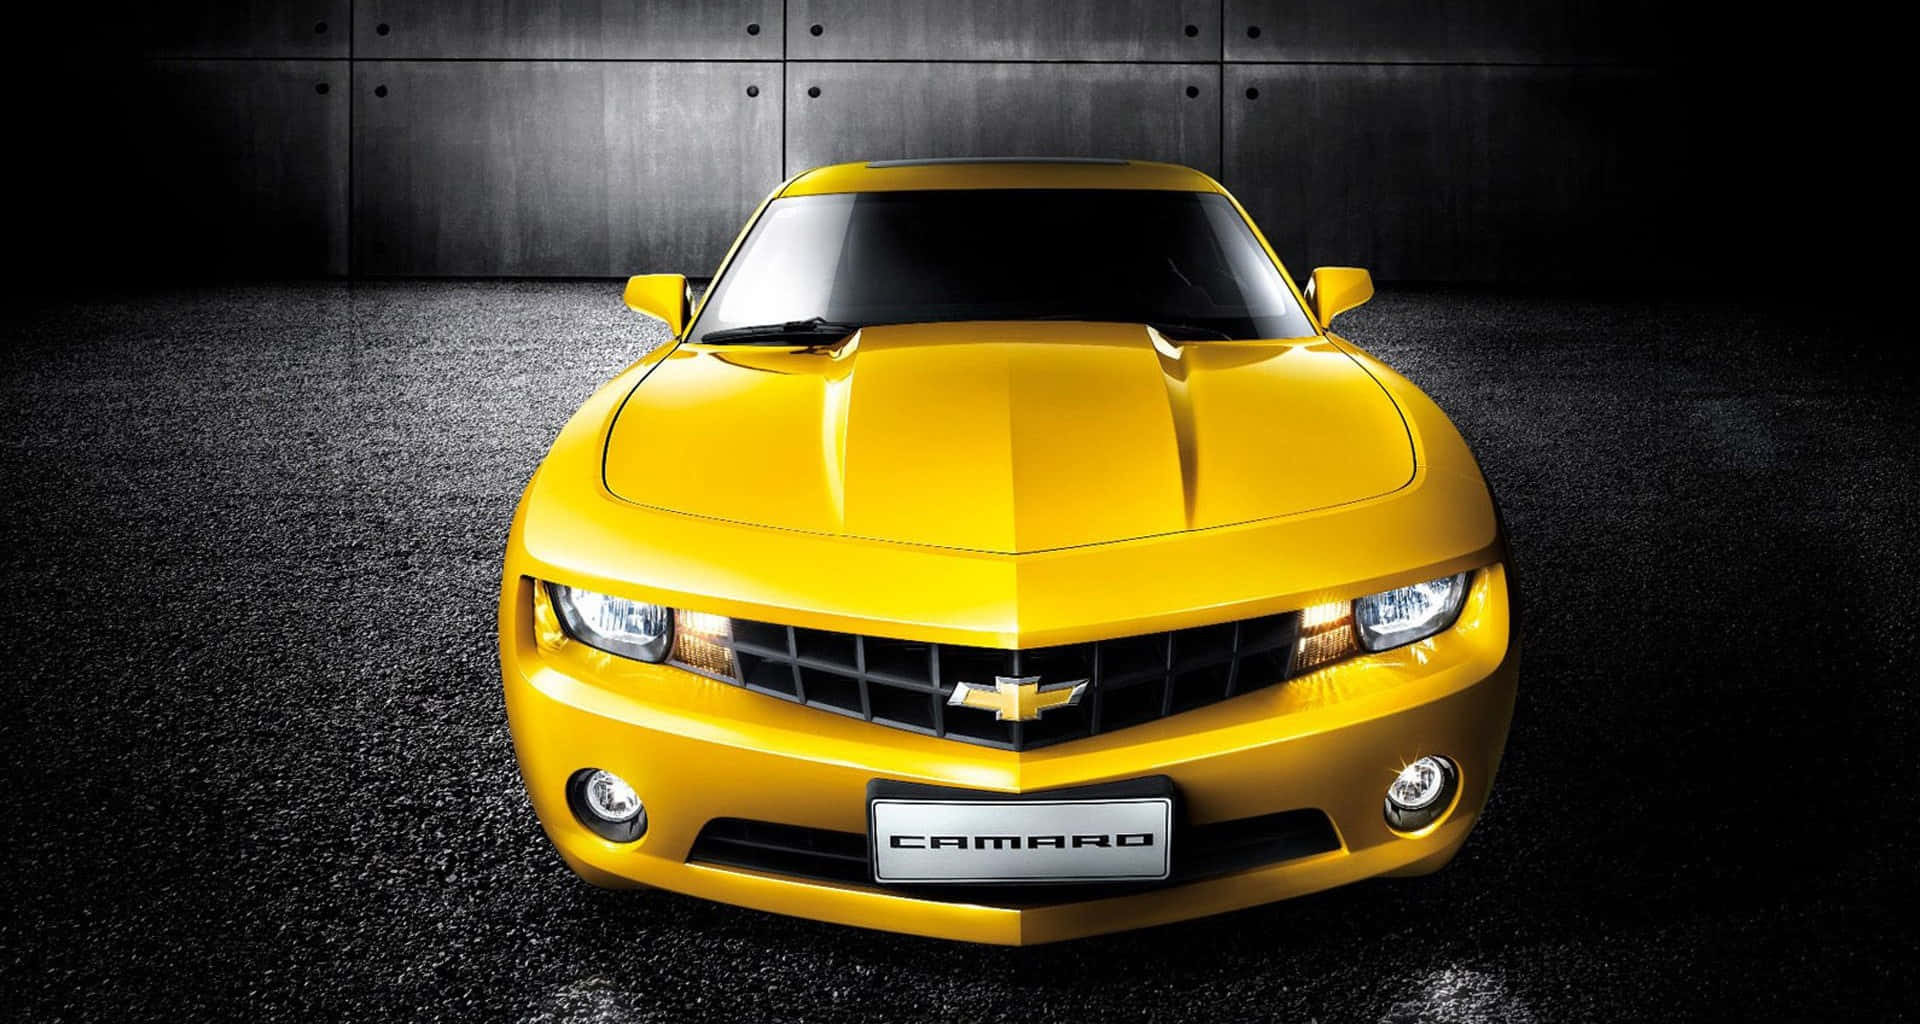 Stunning Yellow Car Parked on the Road Wallpaper